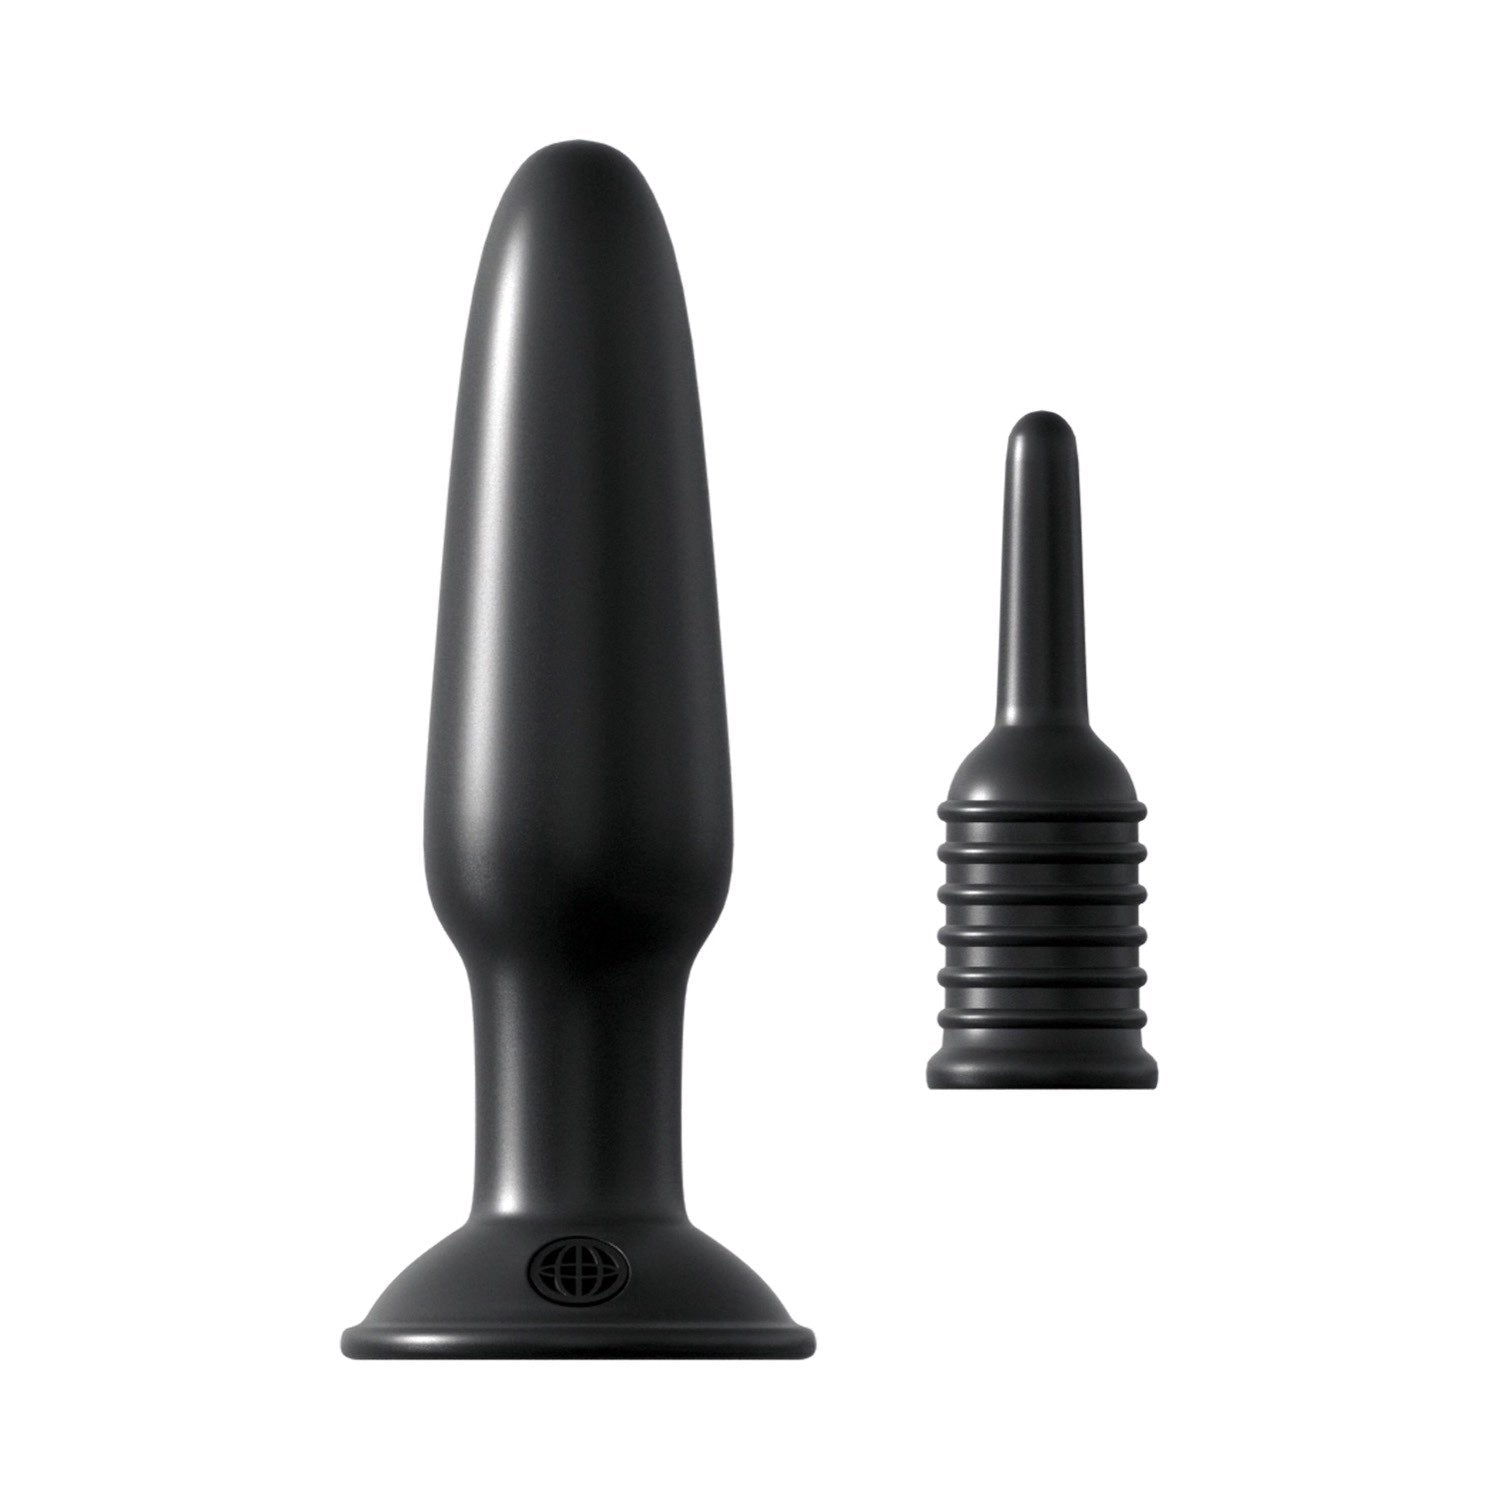 Anal Fantasy Collection Beginner&#39;s Fantasy Kit - Black Anal Kit - 6 Piece Set by Pipedream